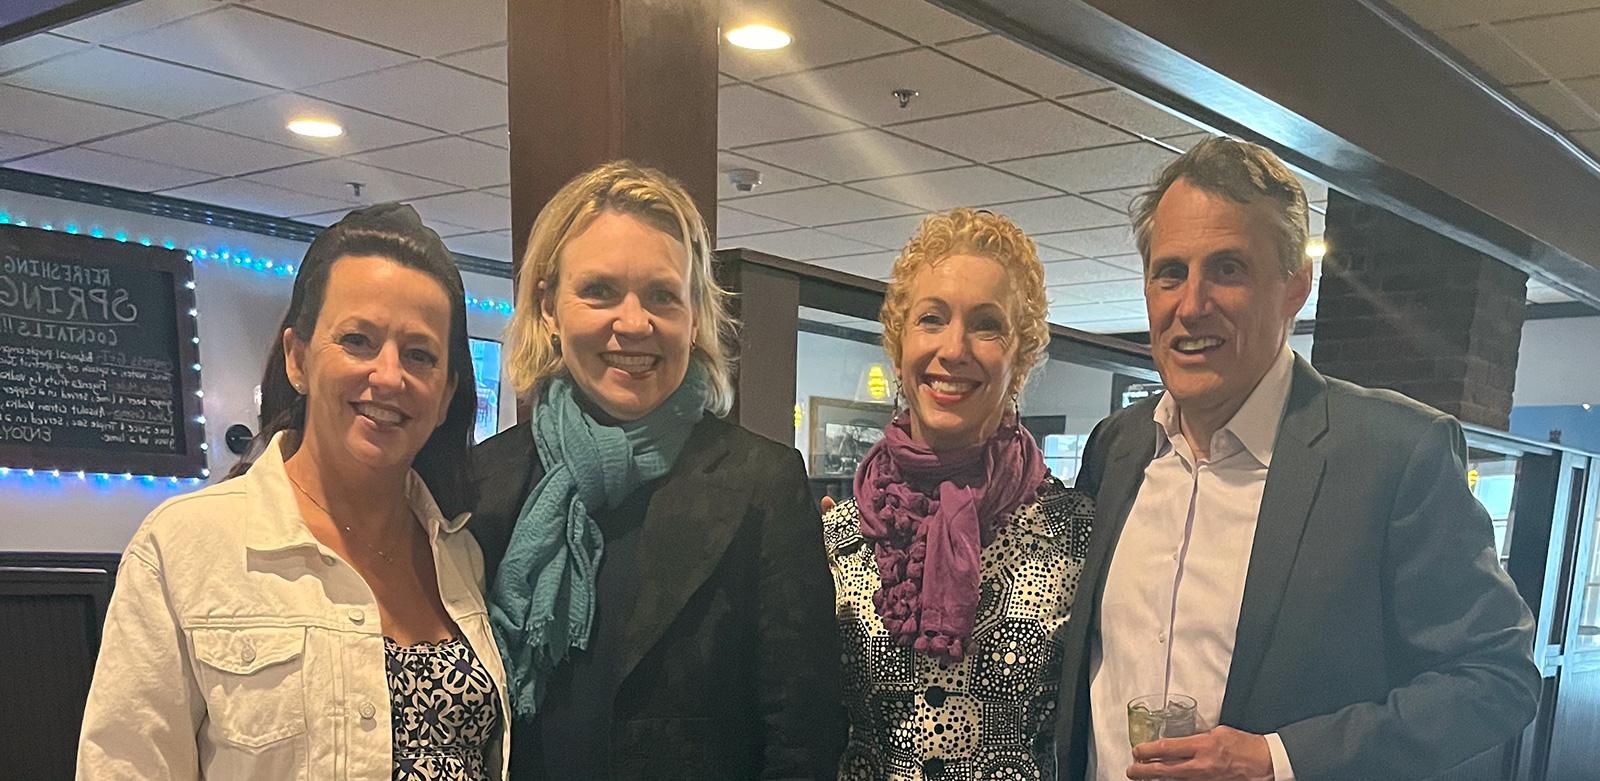 Tom Tansi '85, Amy d'Ablemont Burnes '85, Molly Hussman Ellis '85 and Leslie d'Ablemont Feeley '88 met in Connecticut this summer.